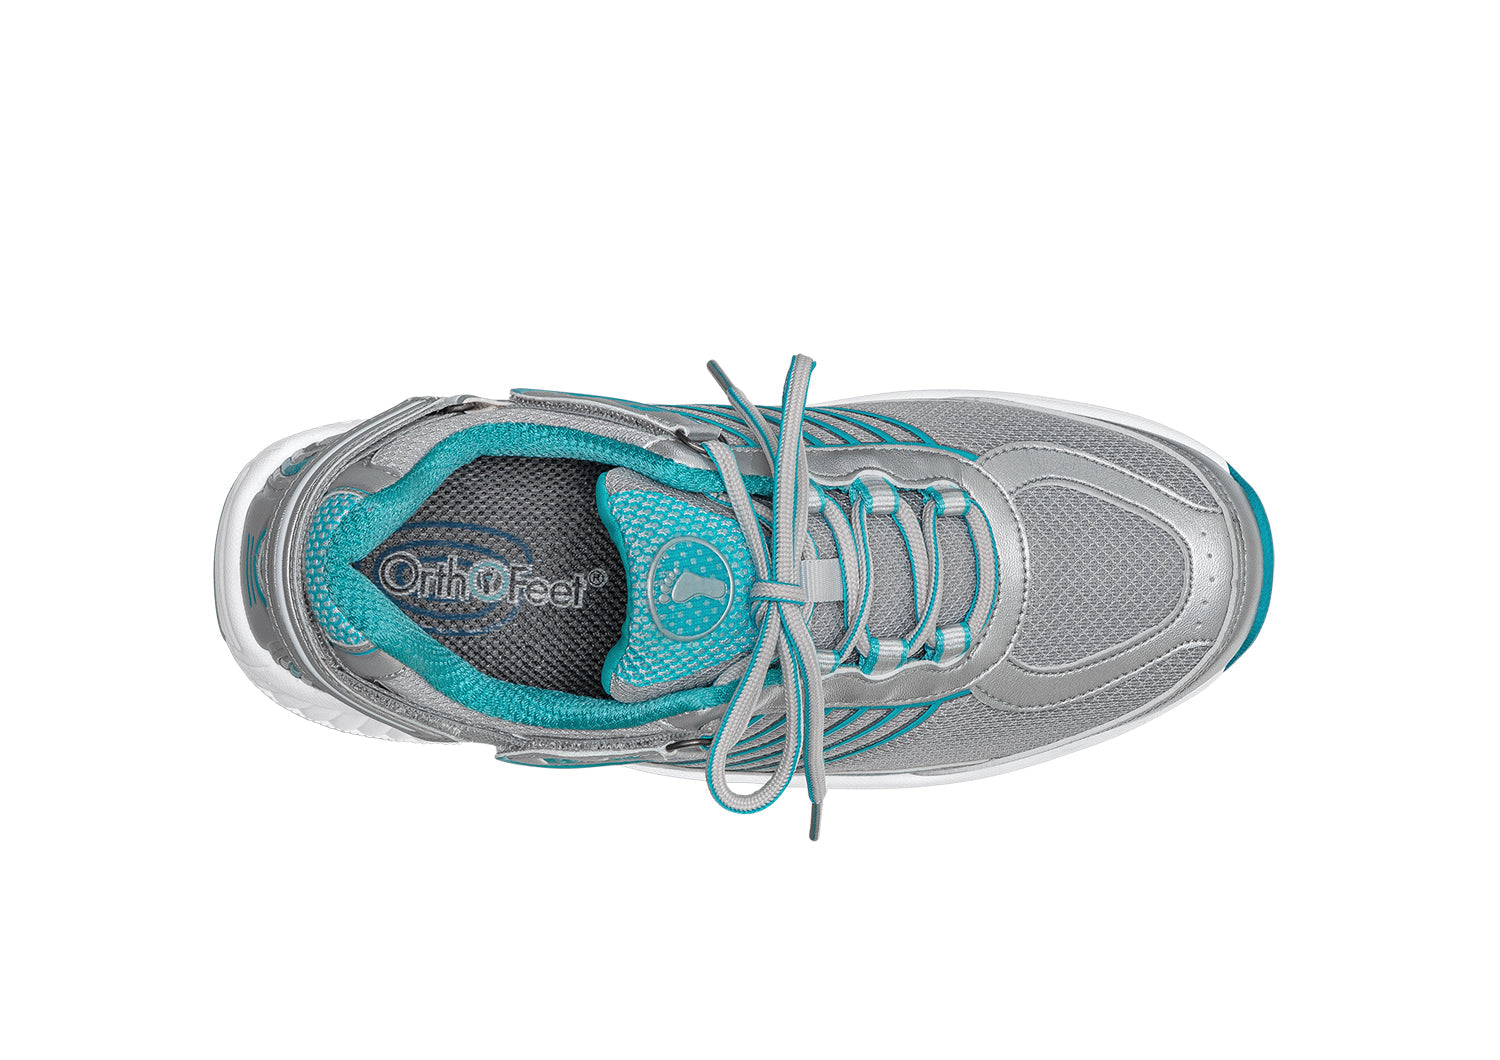 Women's Sneakers Athletic Walking Shoes | Verve Turquoise